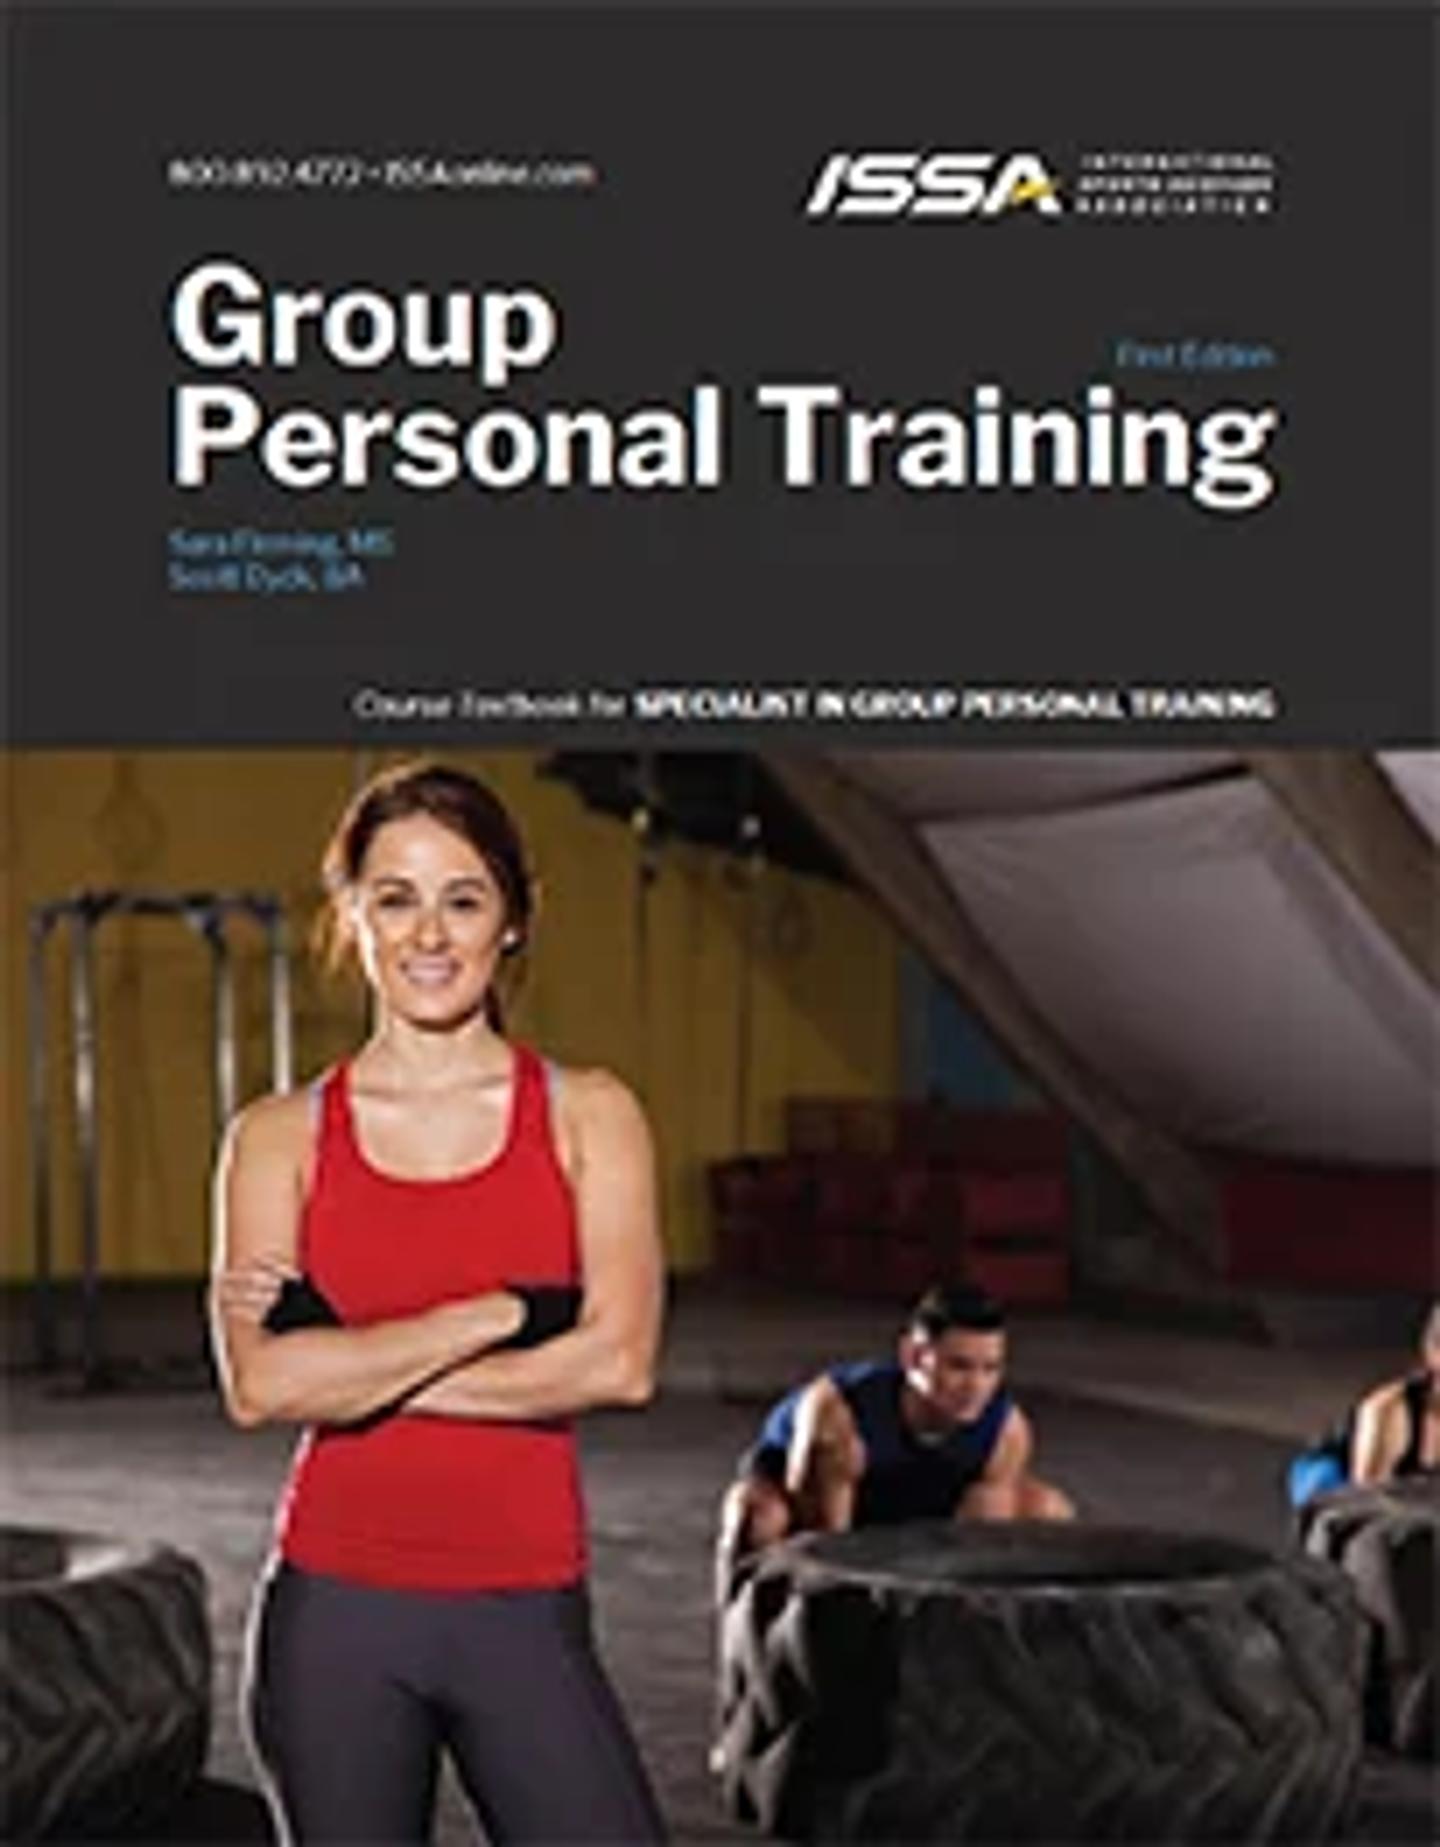 Group Personal Training Book Cover